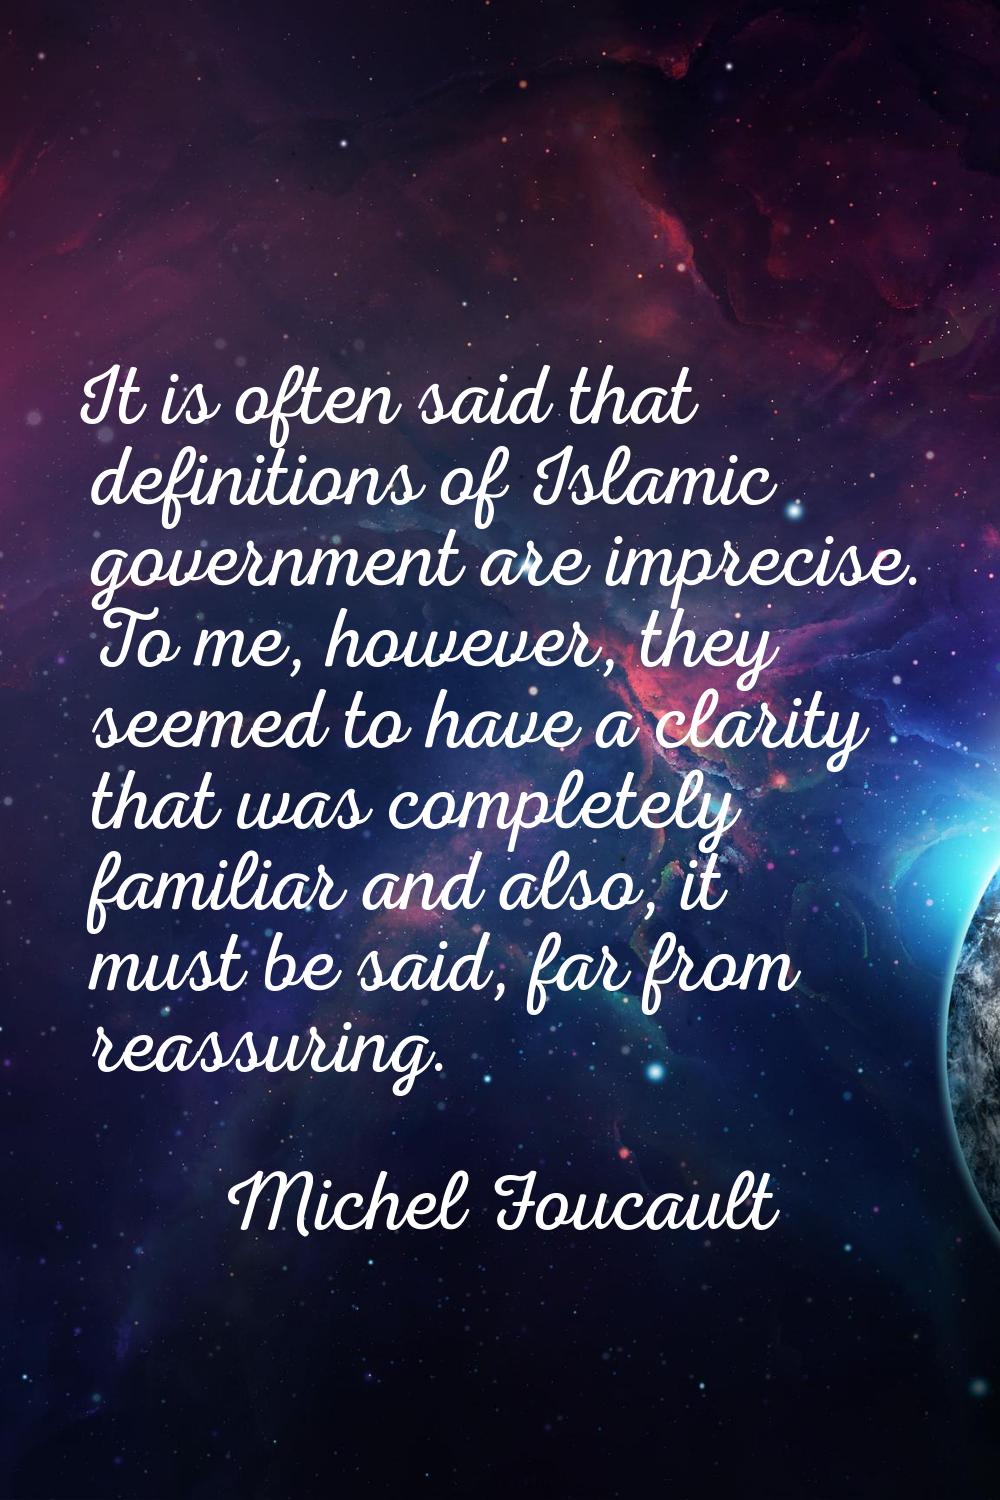 It is often said that definitions of Islamic government are imprecise. To me, however, they seemed 